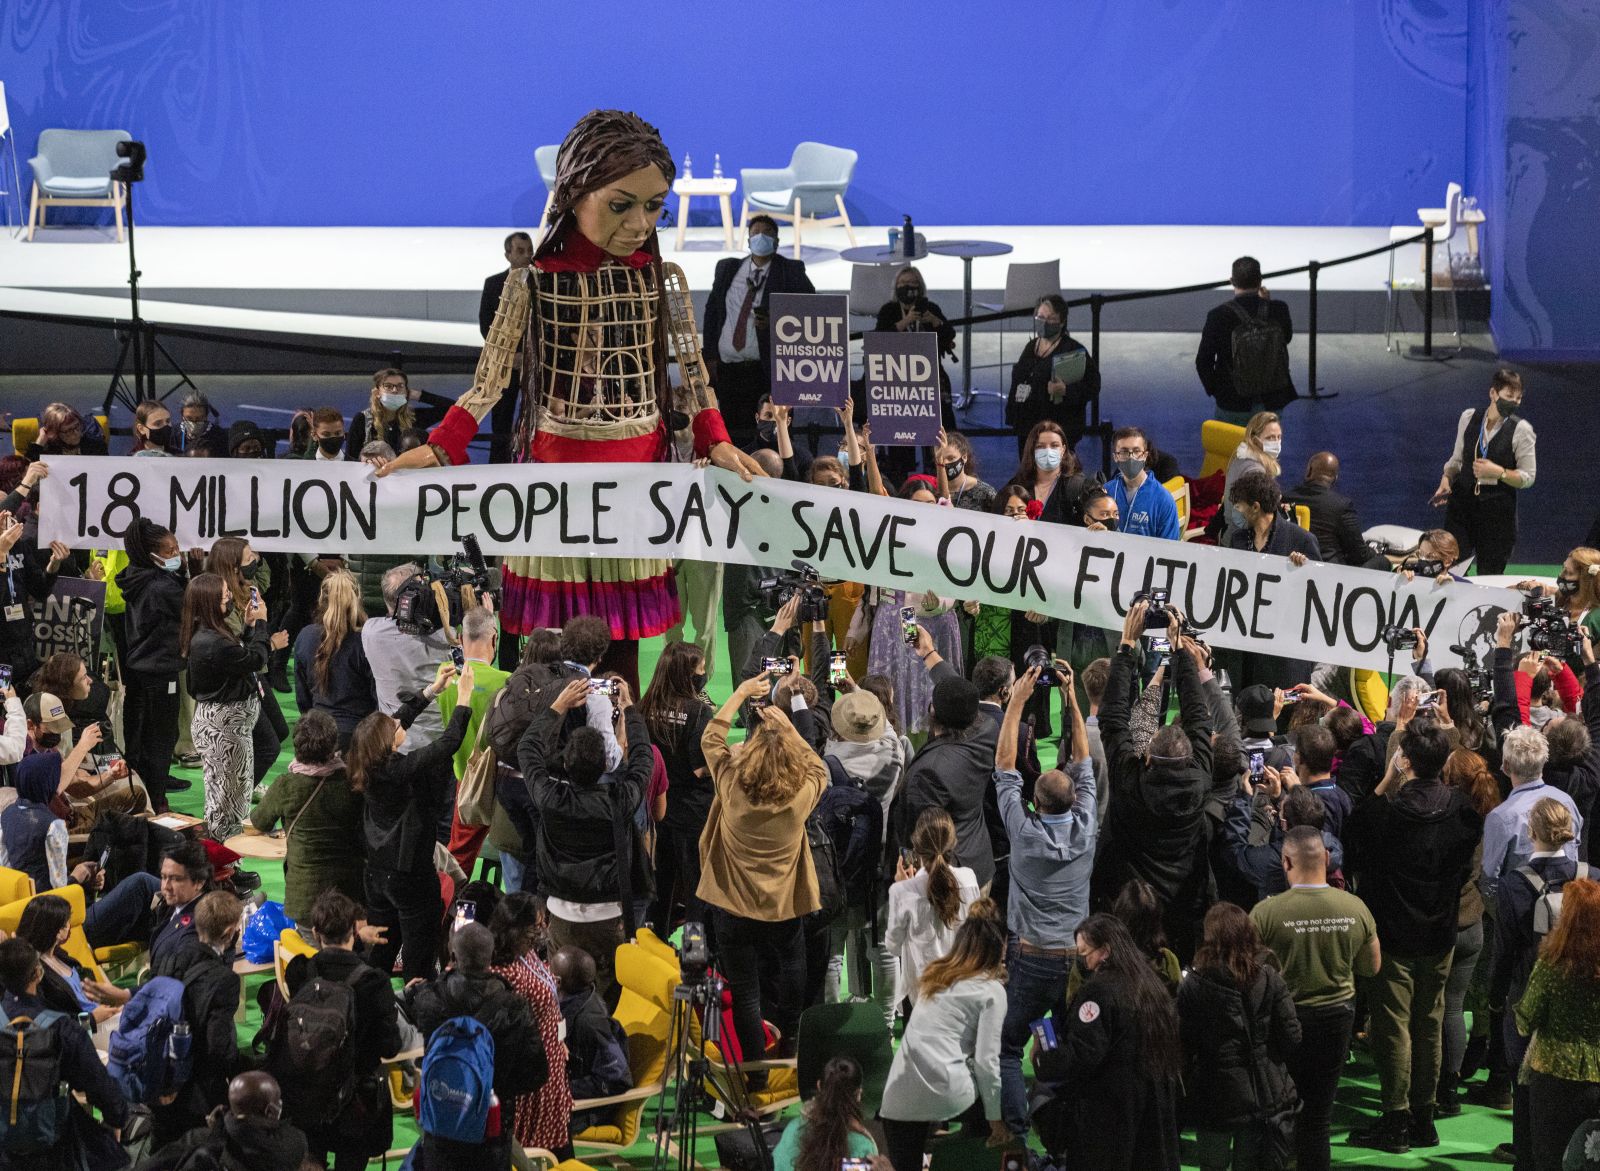 epa09572558 Delegates and participants gather around Little Amal (C), in the Hydro during the COP26 UN Climate Summit in Glasgow, Britain, 09 November 2021. Little Amal is the giant puppet of a 3.5 metre-tall living artwork of a young Syrian refugee child on 'The Walk', travelling 8,000km in 2021 in support of refugees across Turkey, Greece, Italy, France, Switzerland, Germany, Belgium and the UK to focus attention on the urgent needs of young refugees. The 2021 United Nations Climate Change Conference (COP26) runs from 31 October to 12 November 2021 in Glasgow.  EPA/ROBERT PERRY